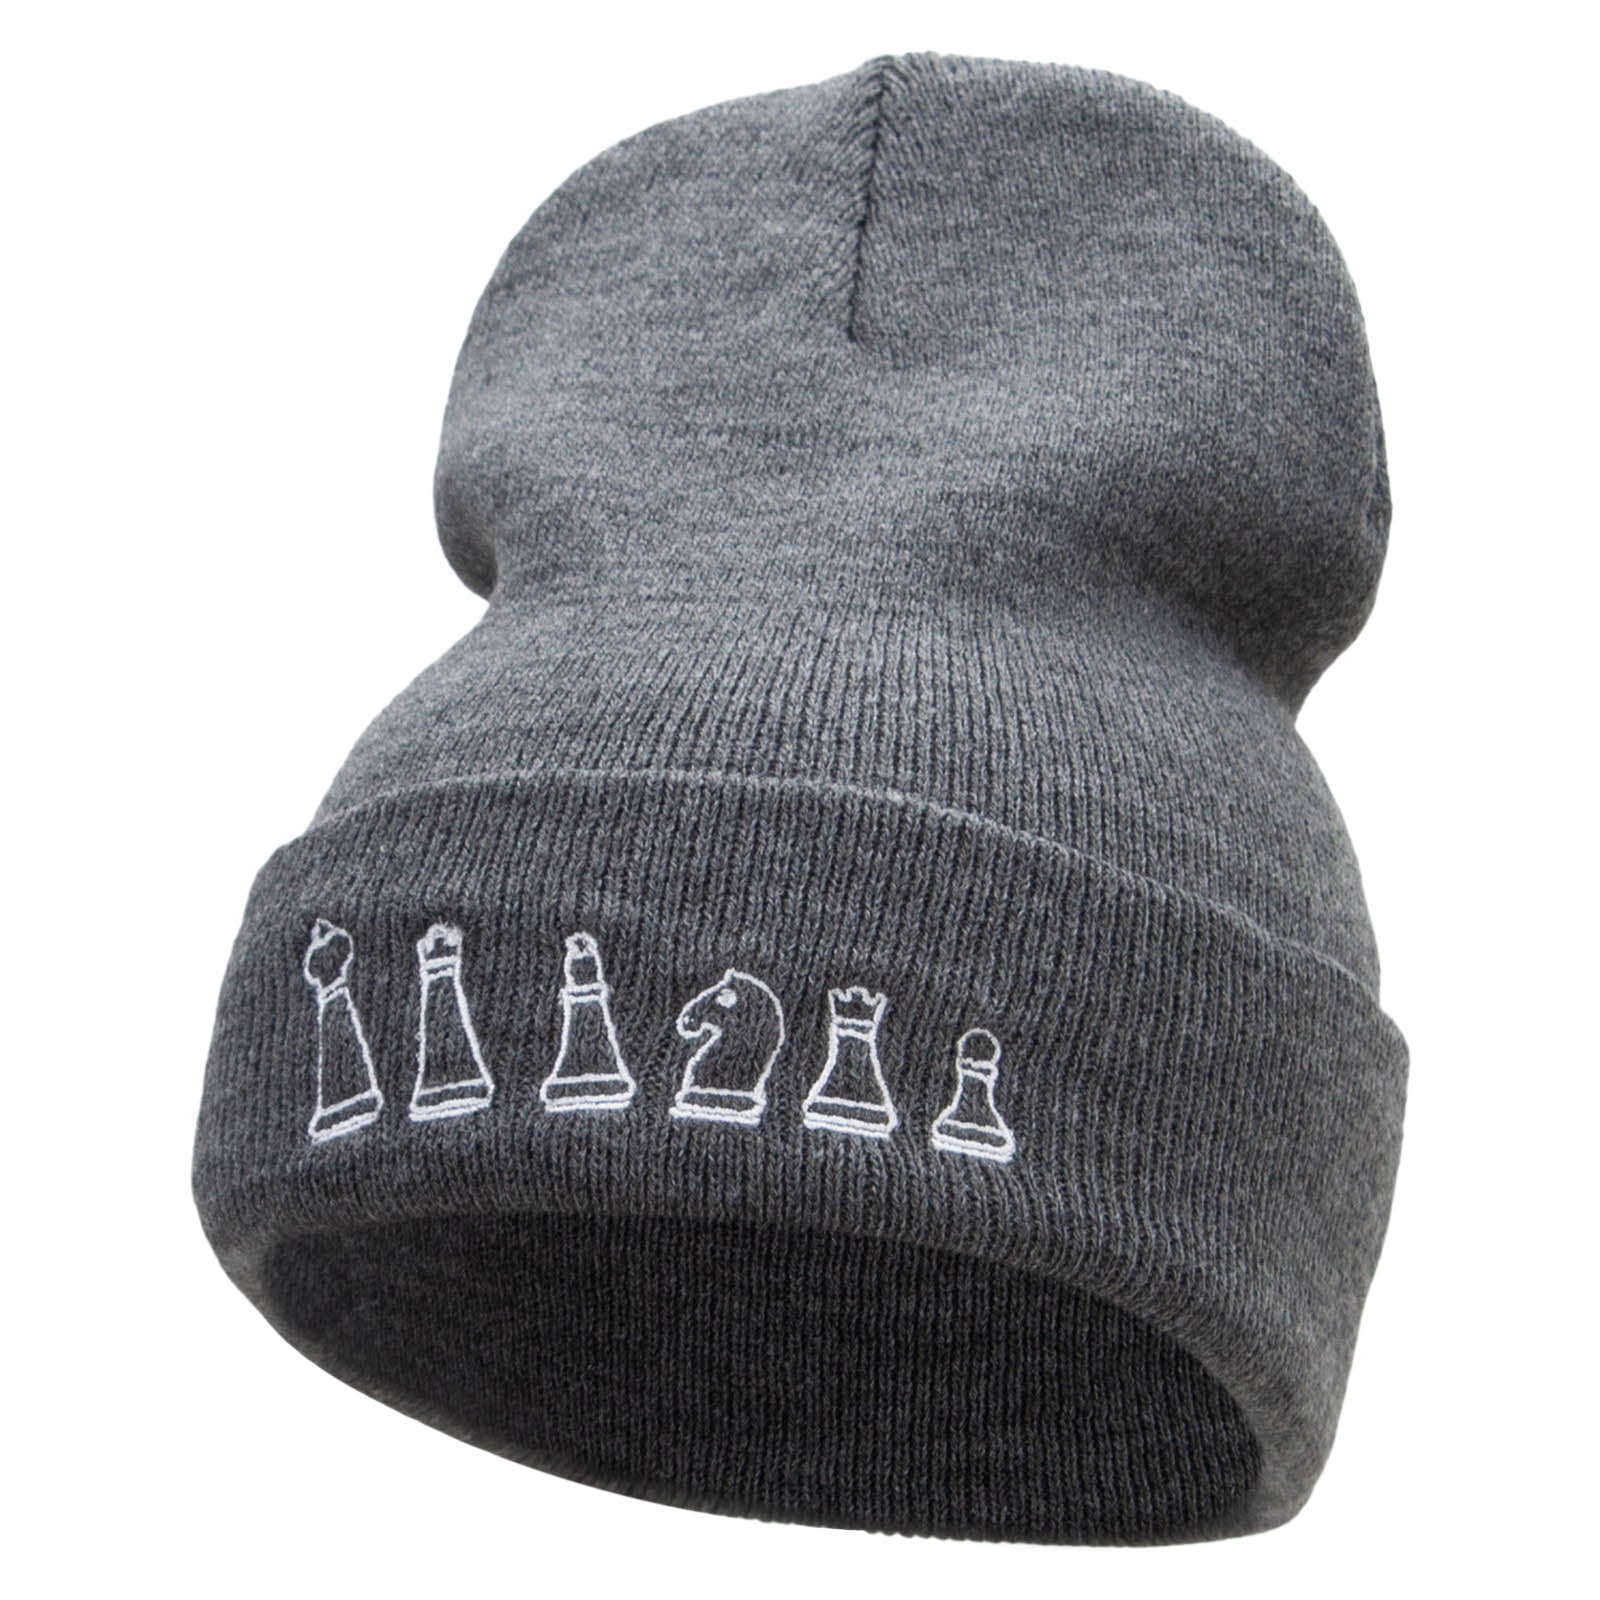 The Chest Set Embroidered 12 Inch Long Knitted Beanie - Dk Grey OSFM